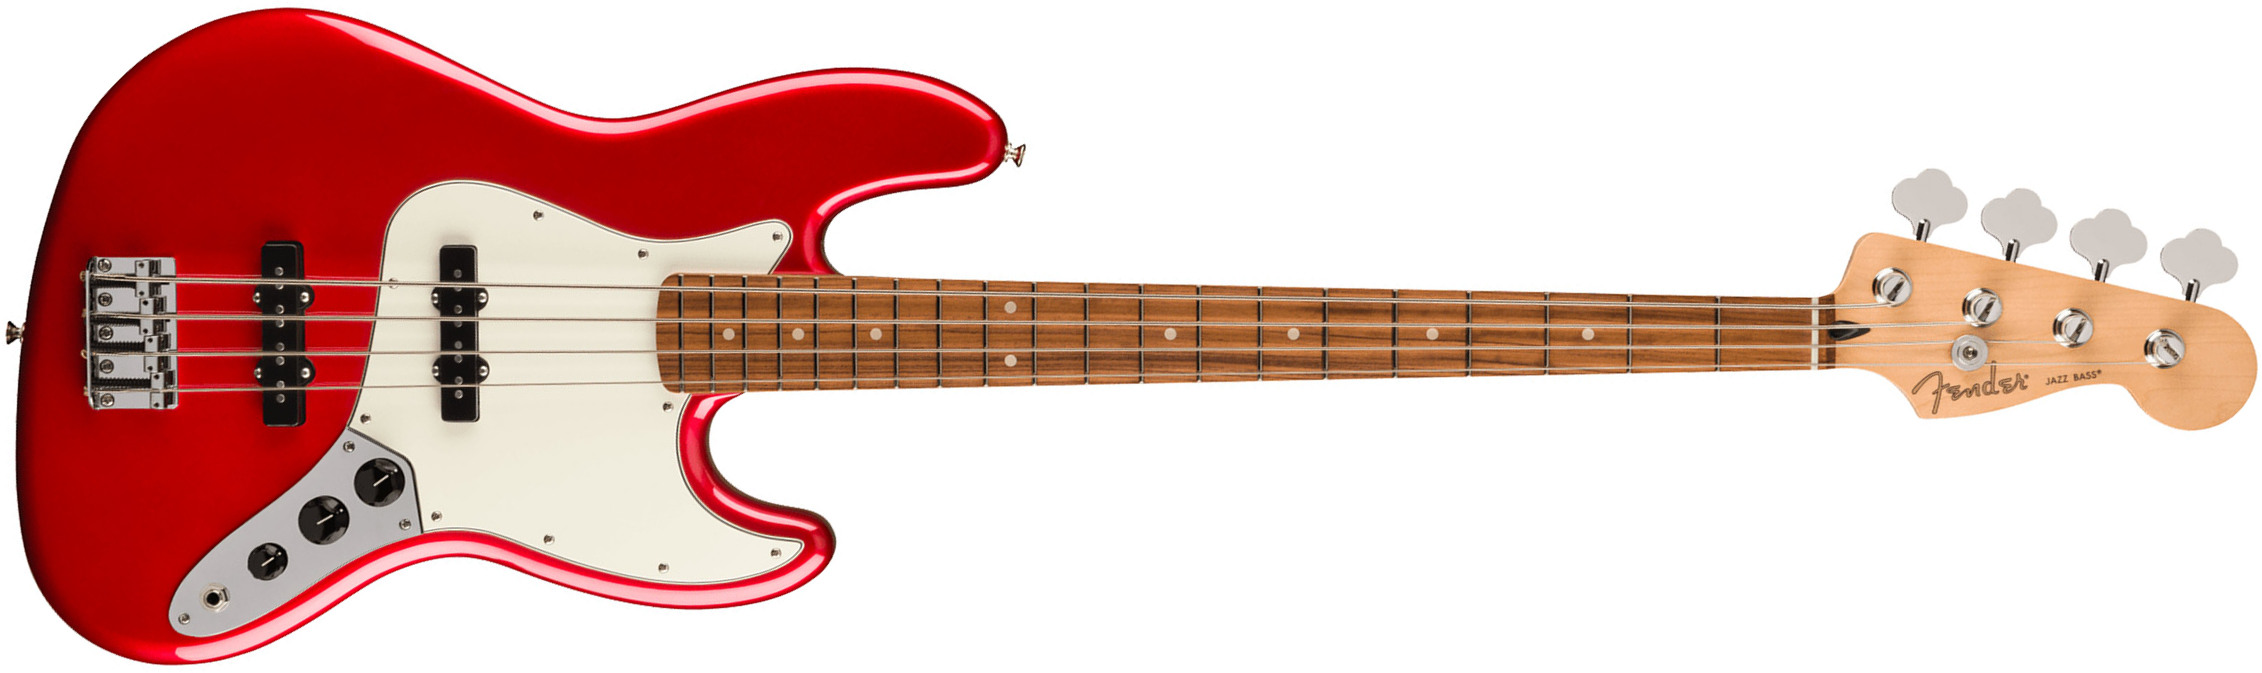 Fender Jazz Bass Player Mex 2023 Pf - Candy Apple Red - Basse Électrique Solid Body - Main picture